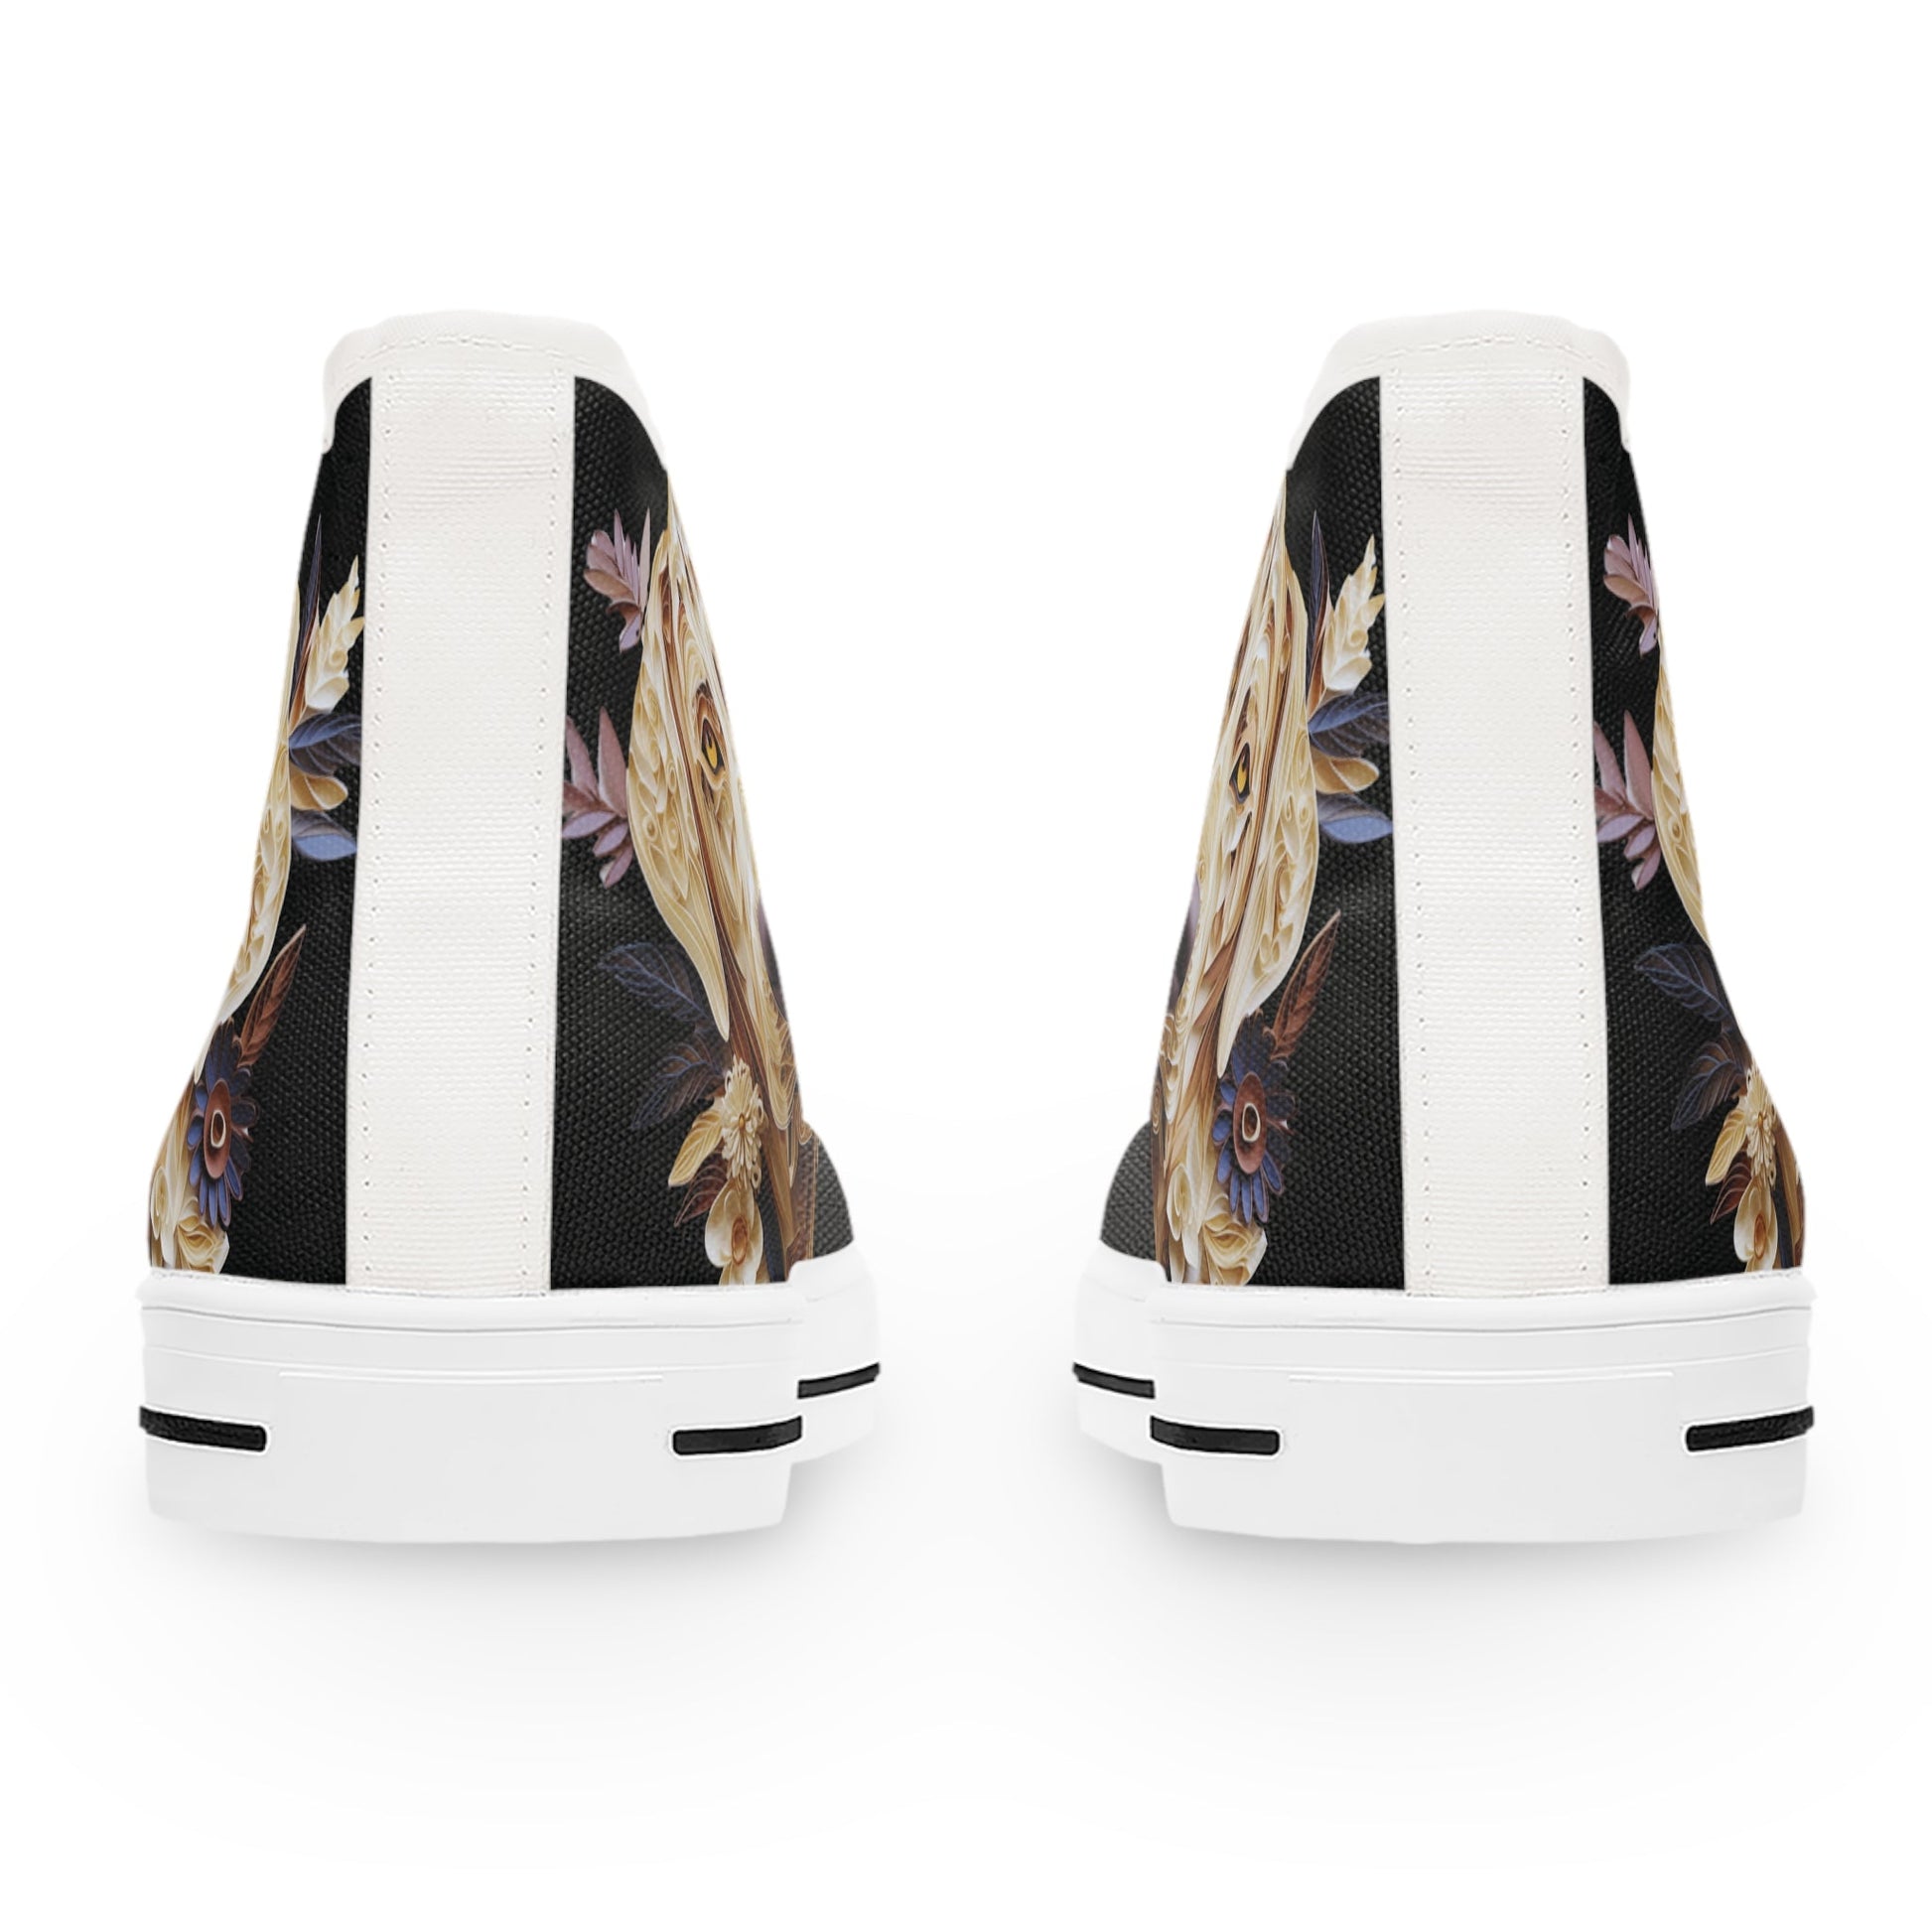 Women's High-Top Trainers featuring a Labrador Paper Quilling Effect Design - Hobbster